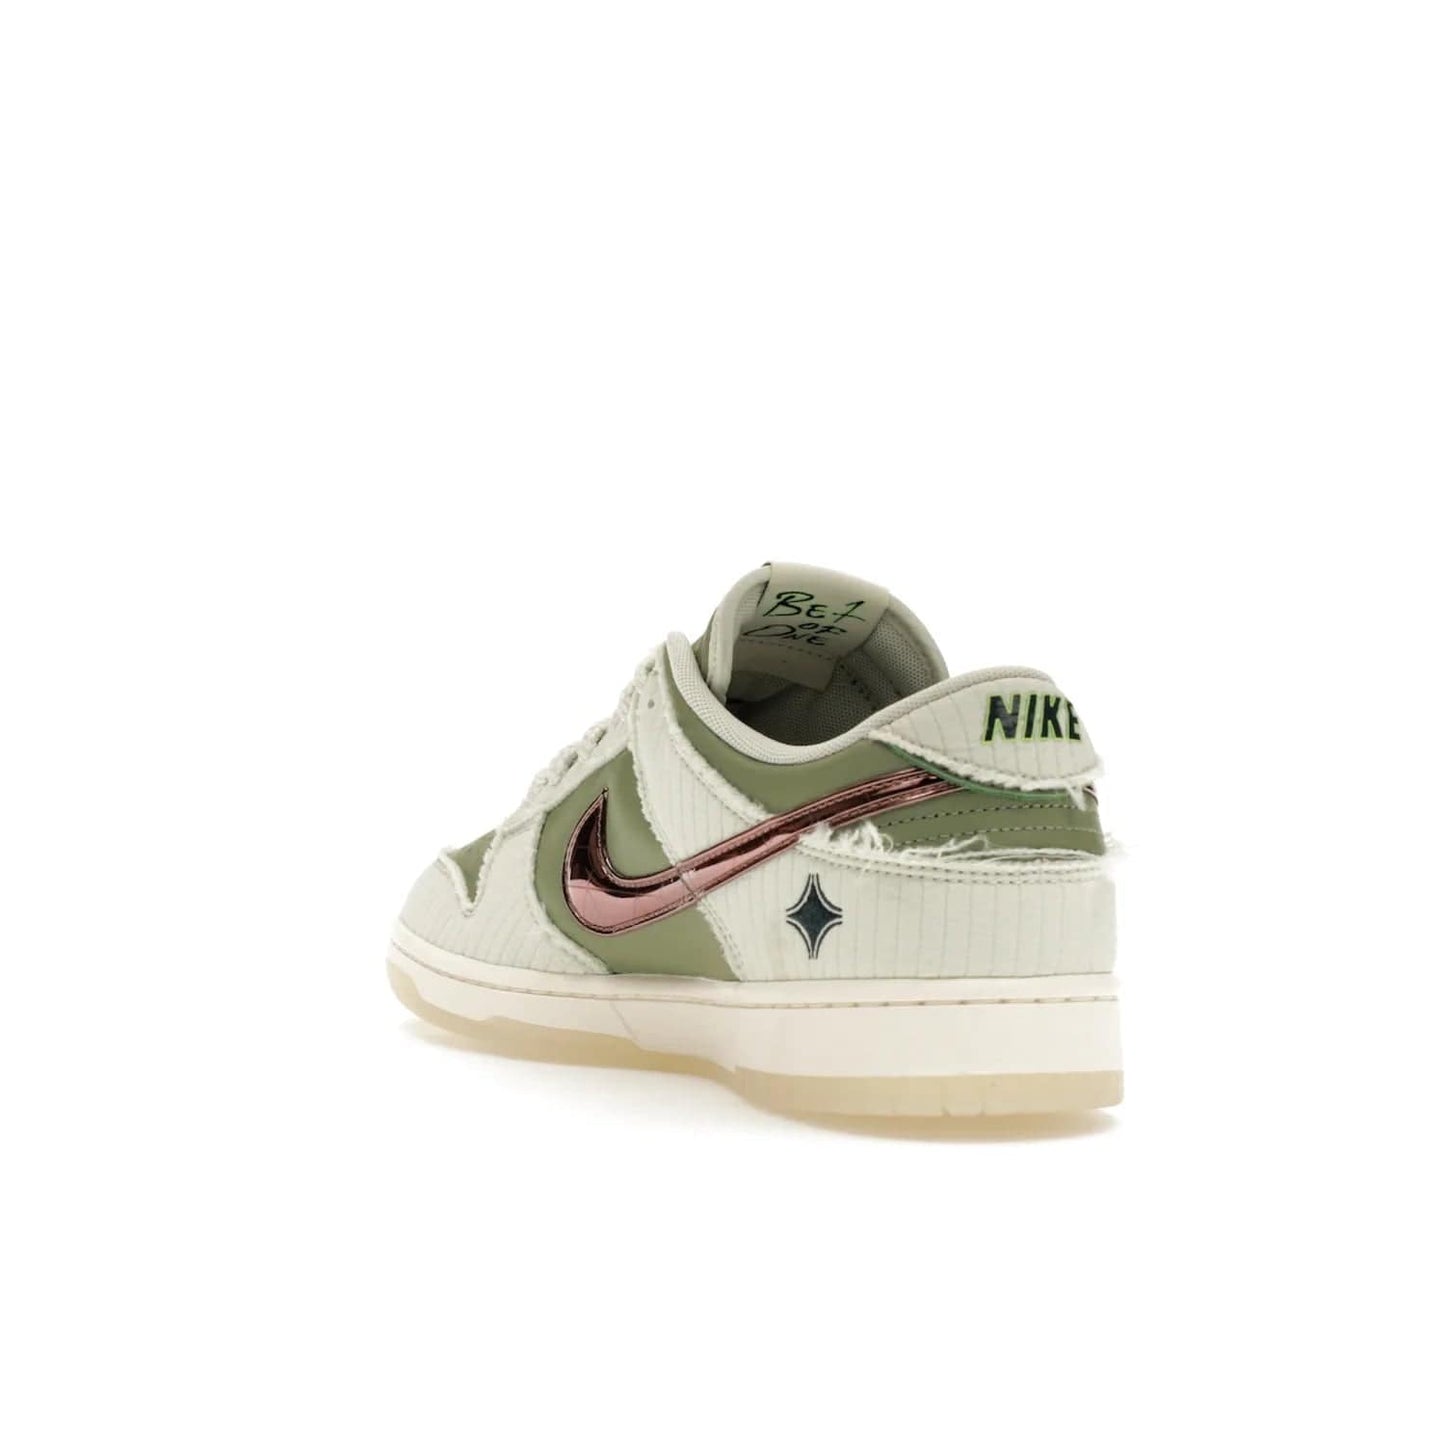 Nike Dunk Low Retro PRM Kyler Murray Be 1 of One - Image 25 - Only at www.BallersClubKickz.com - Introducing the Nike Dunk Low Retro PRM Kyler Murray "Be 1 of One"! A Sea Glass upper with Sail and Oil Green accents, finished with Rose Gold accents. Drop date: November 10th.